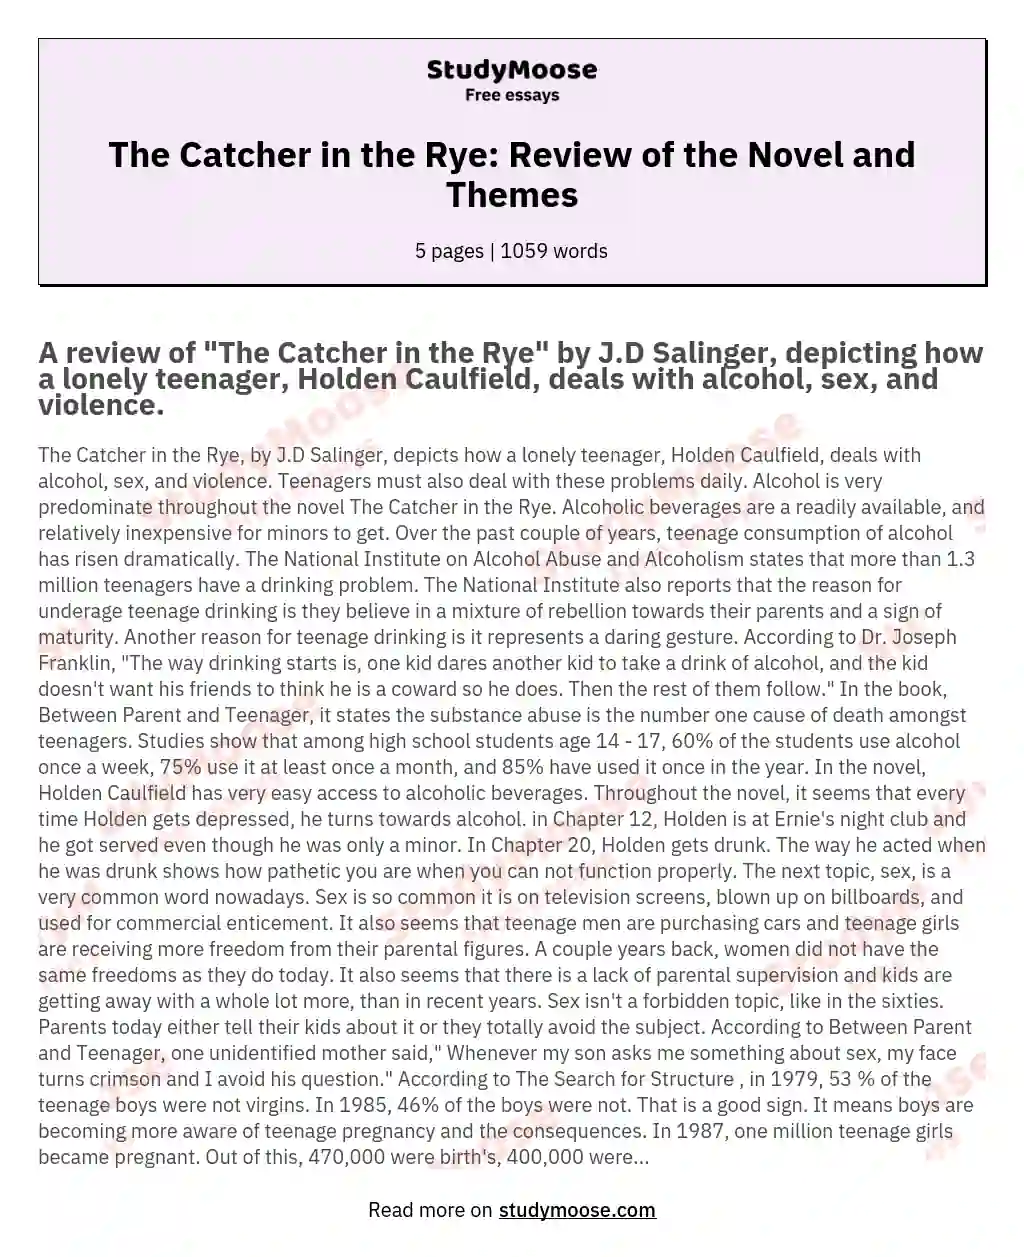 The Catcher in the Rye: Review of the Novel and Themes